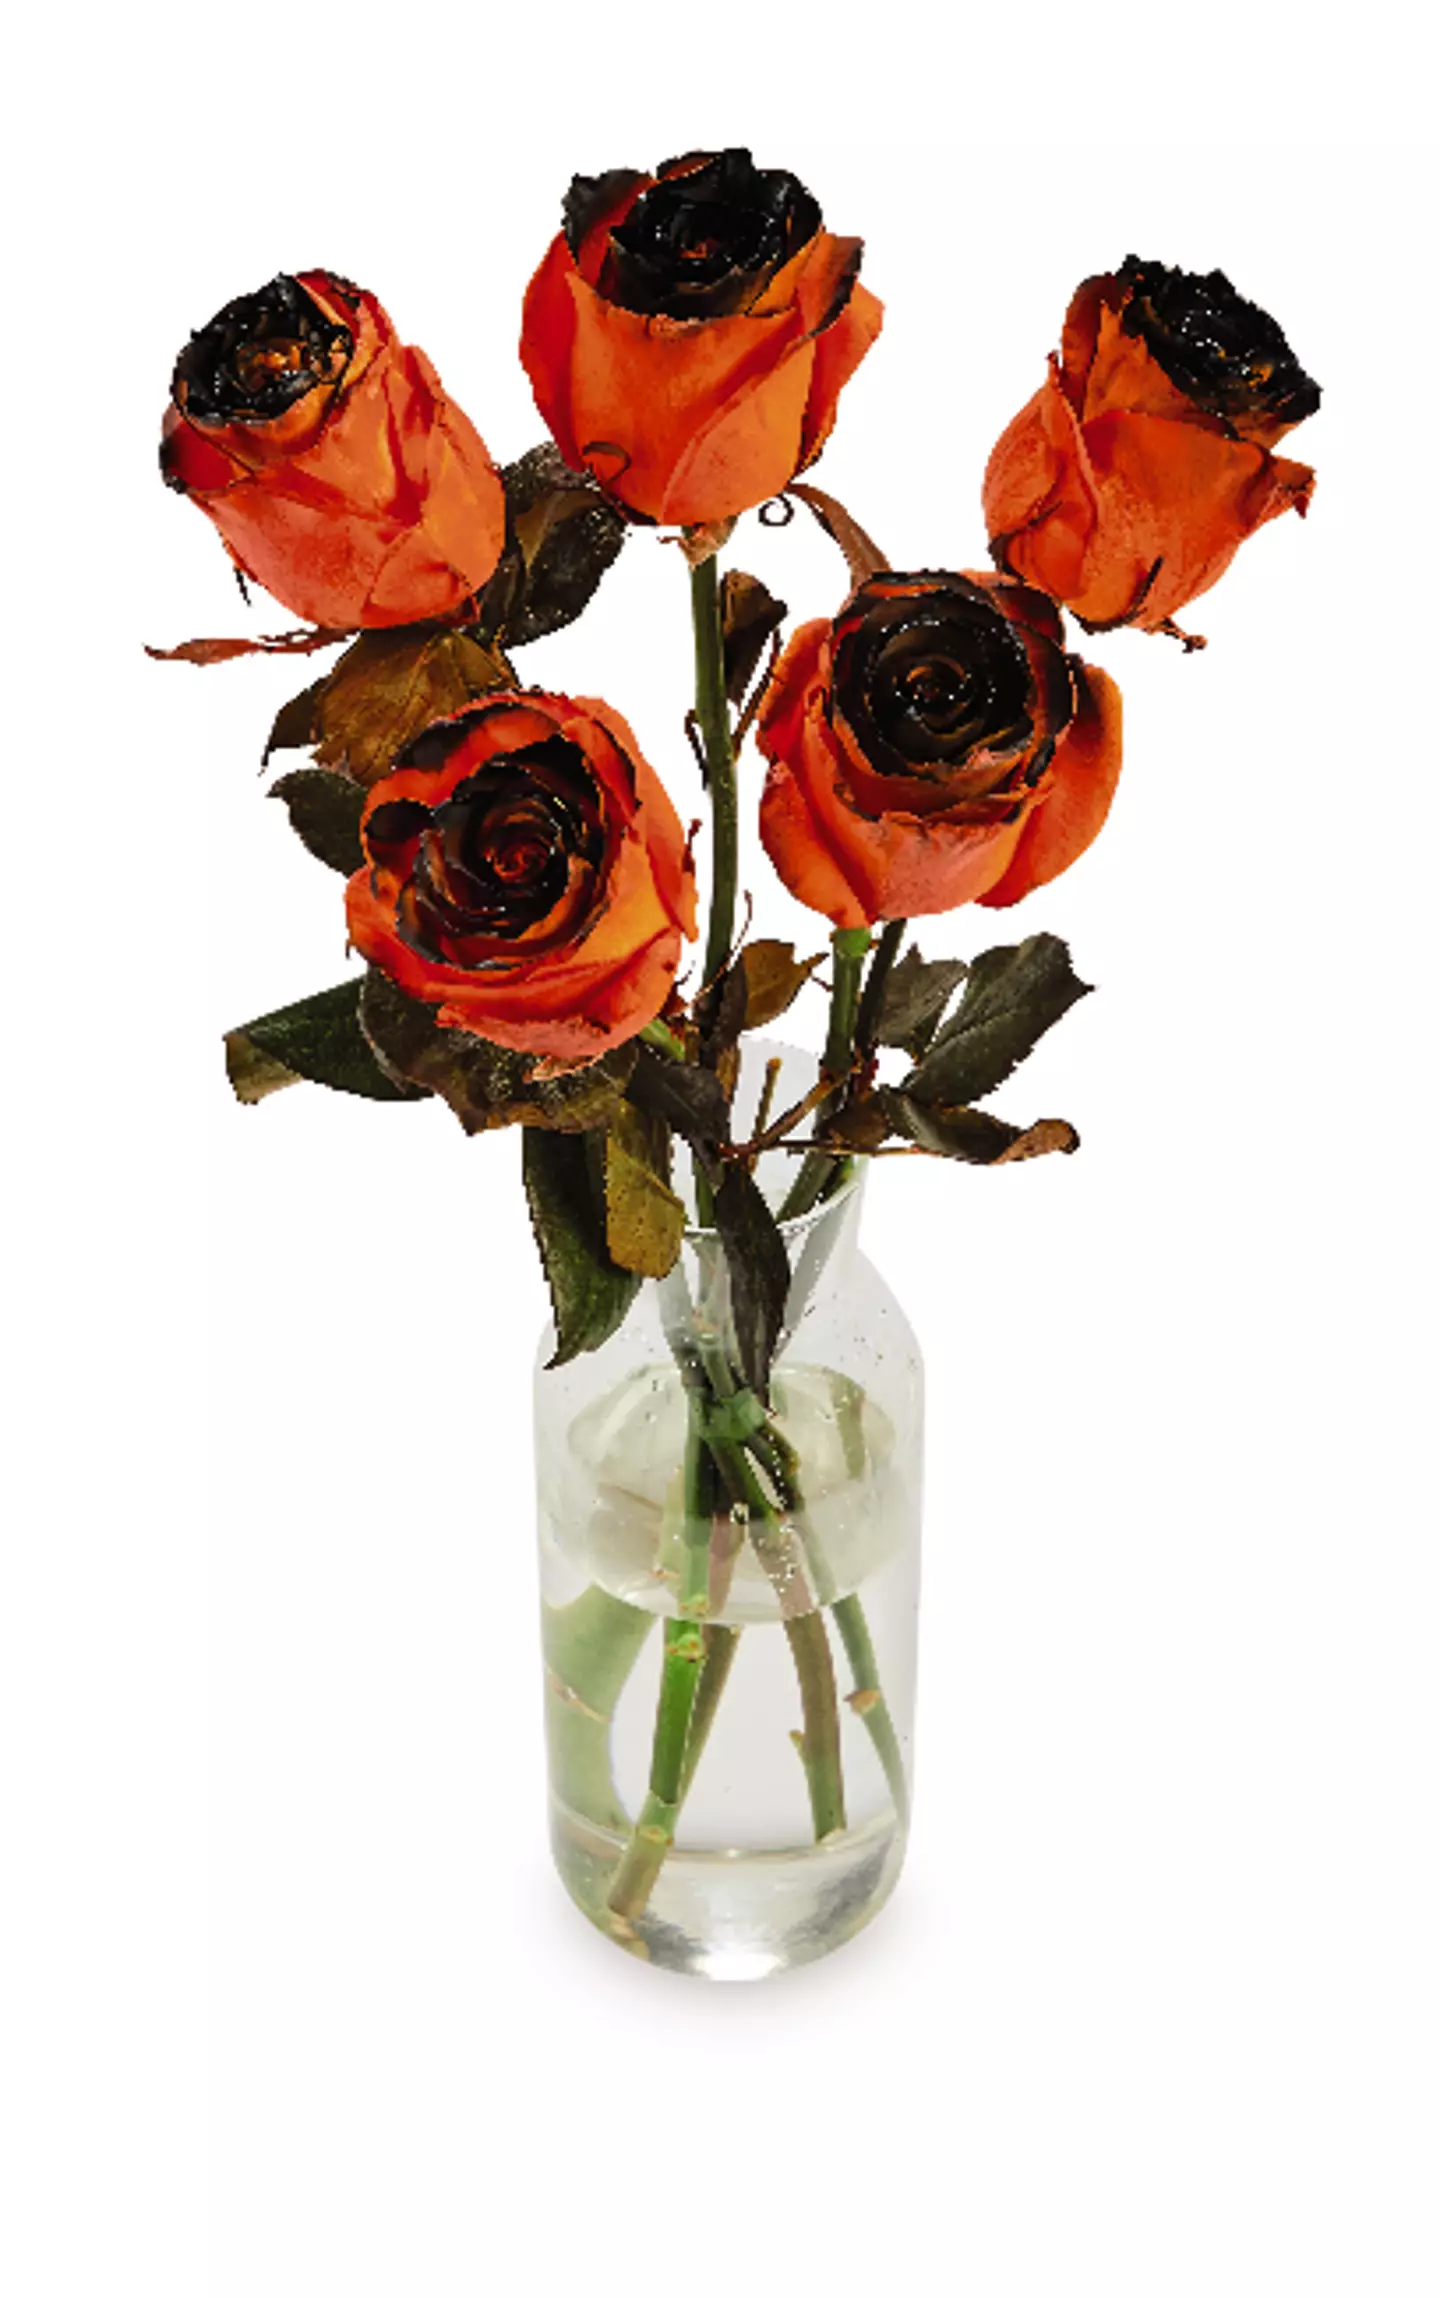 Fancy some blood-dipped orange roses? (